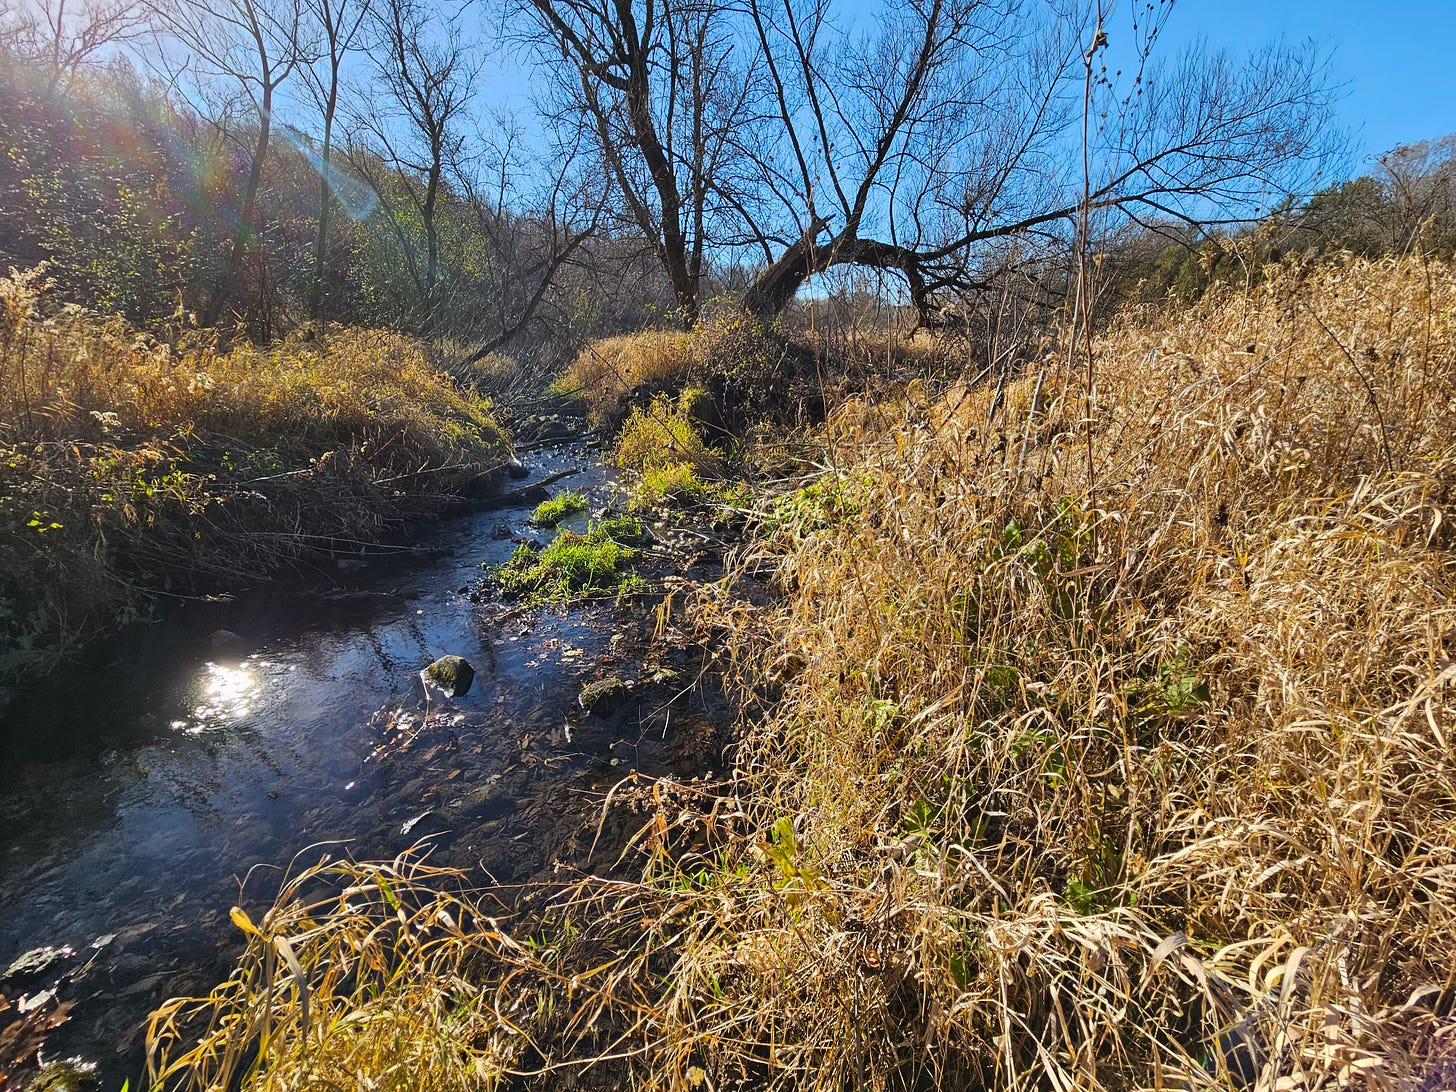 A shallow stream winds around banks covered in tall, dried grasses. Blue sky overhead frames a few bare trees in the background.